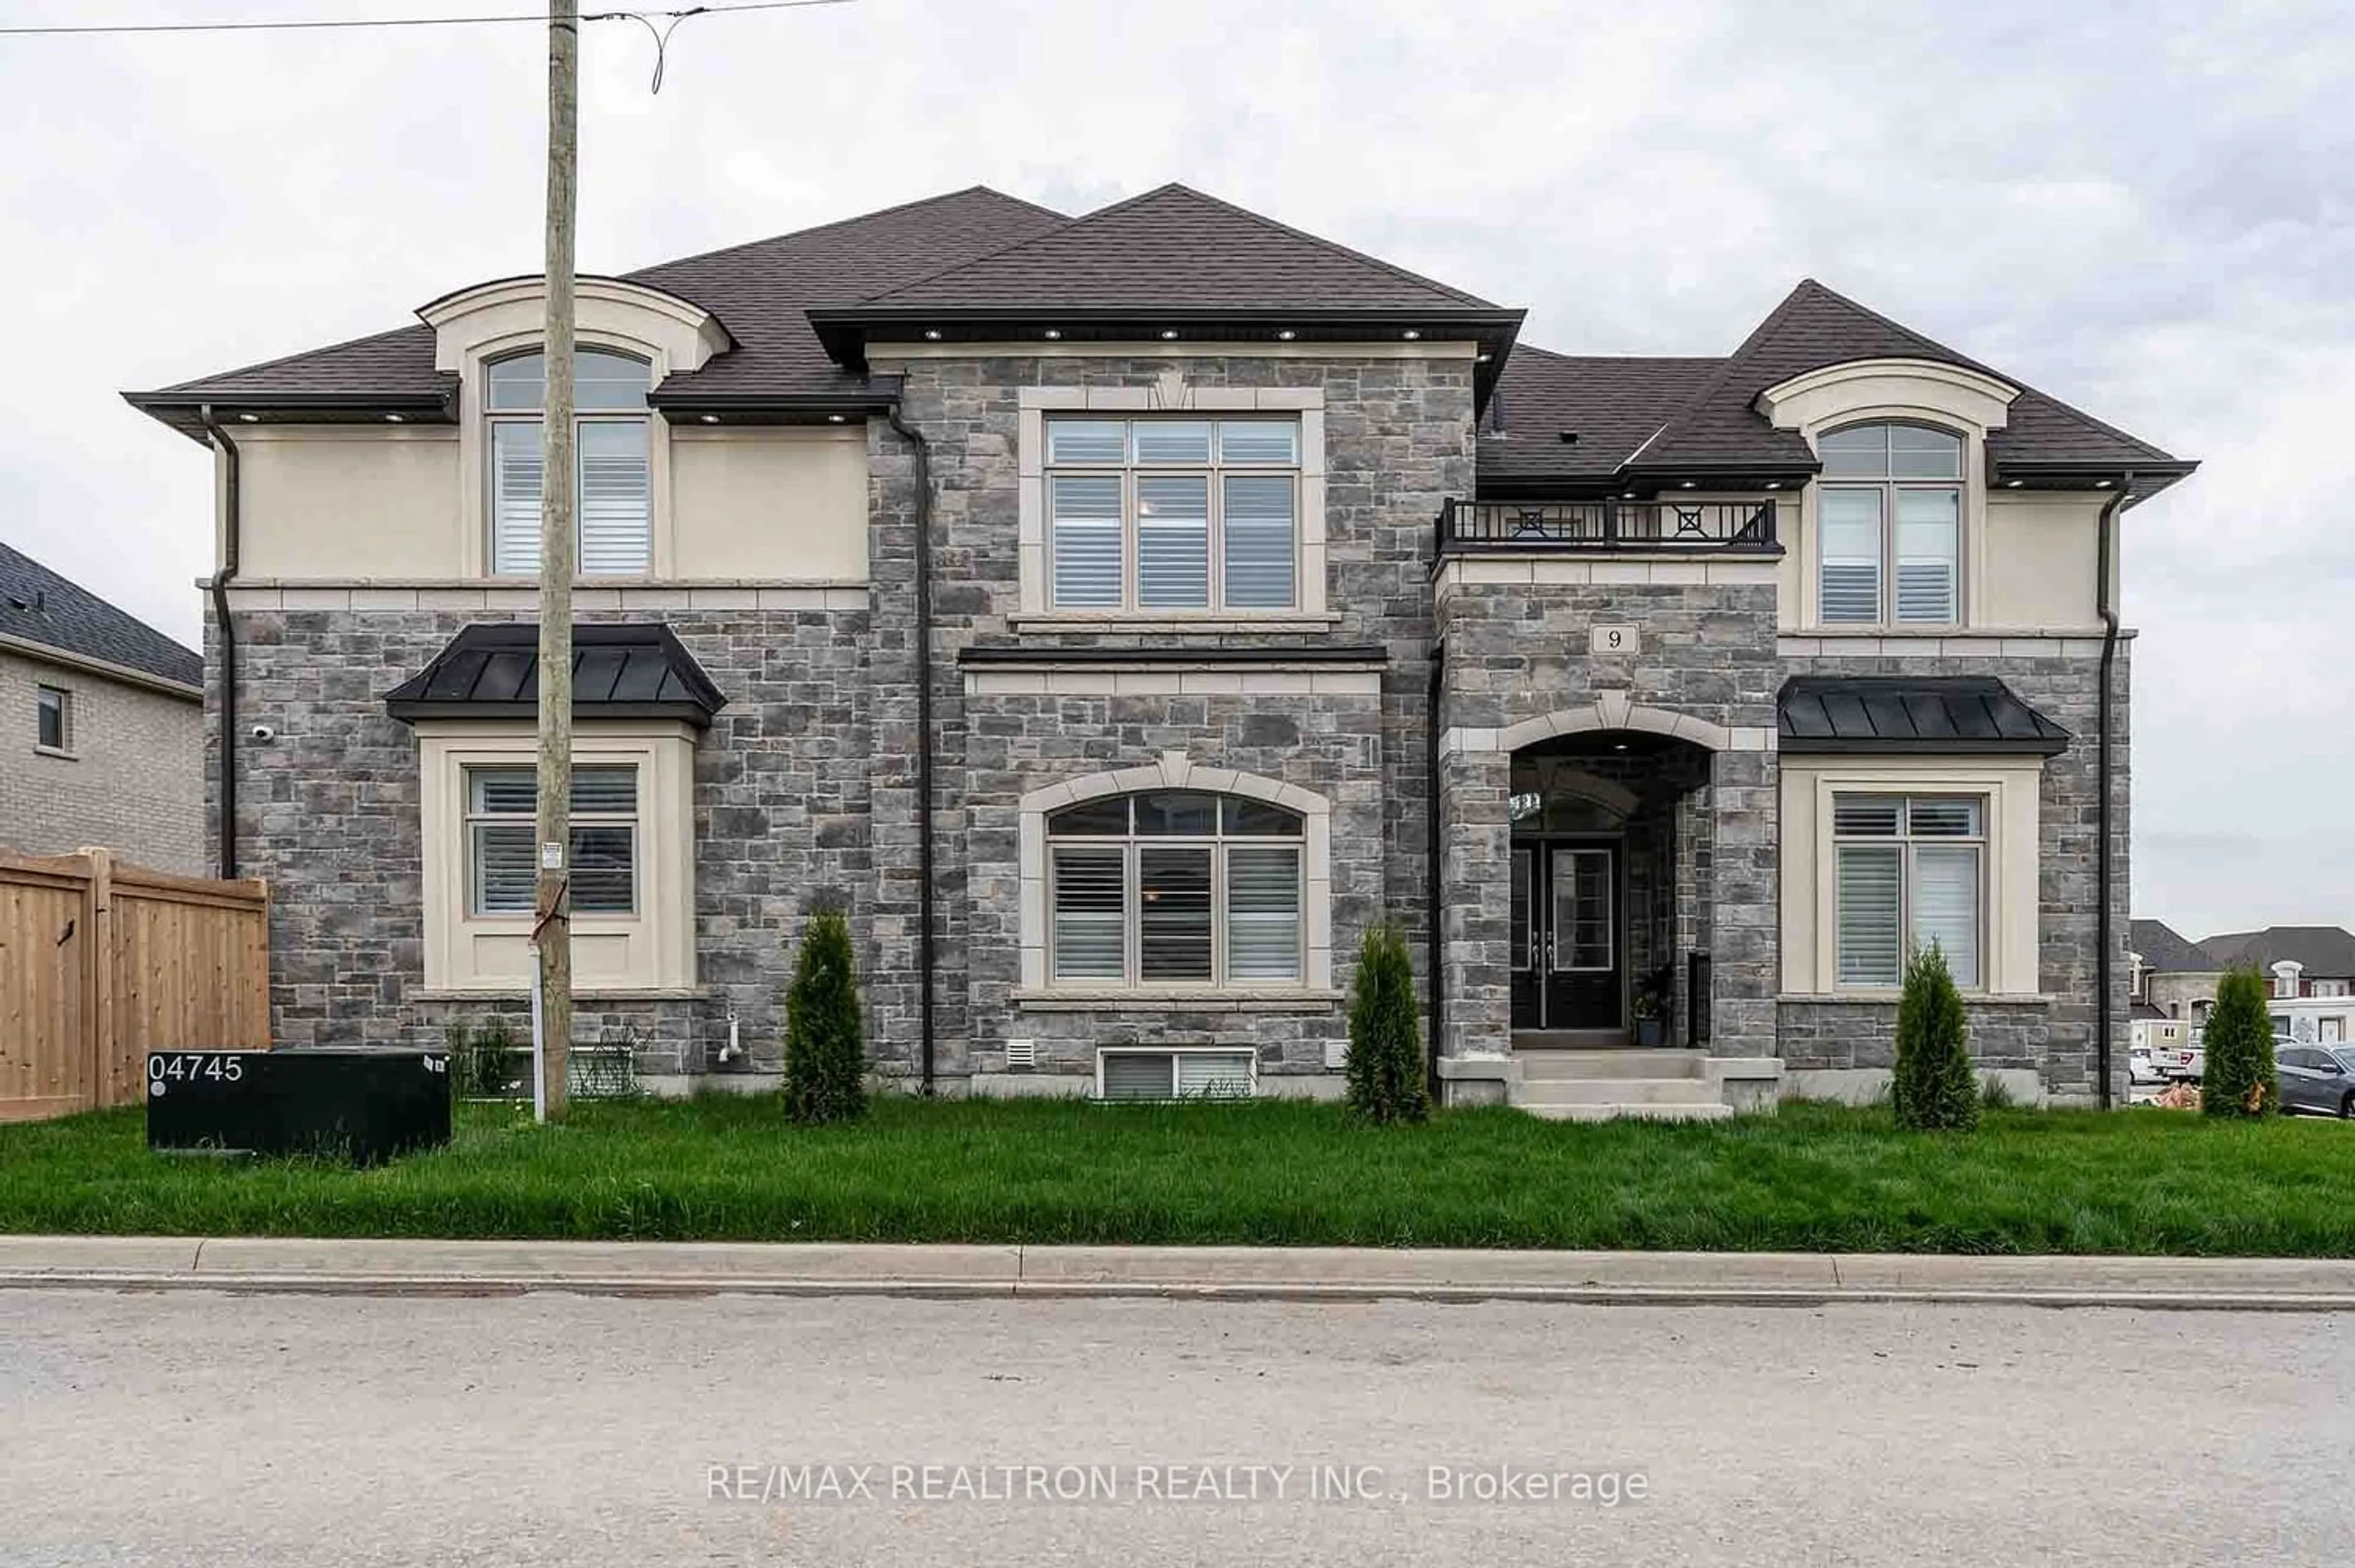 Home with brick exterior material for 9 Cranley Rd, East Gwillimbury Ontario L9N 0T7